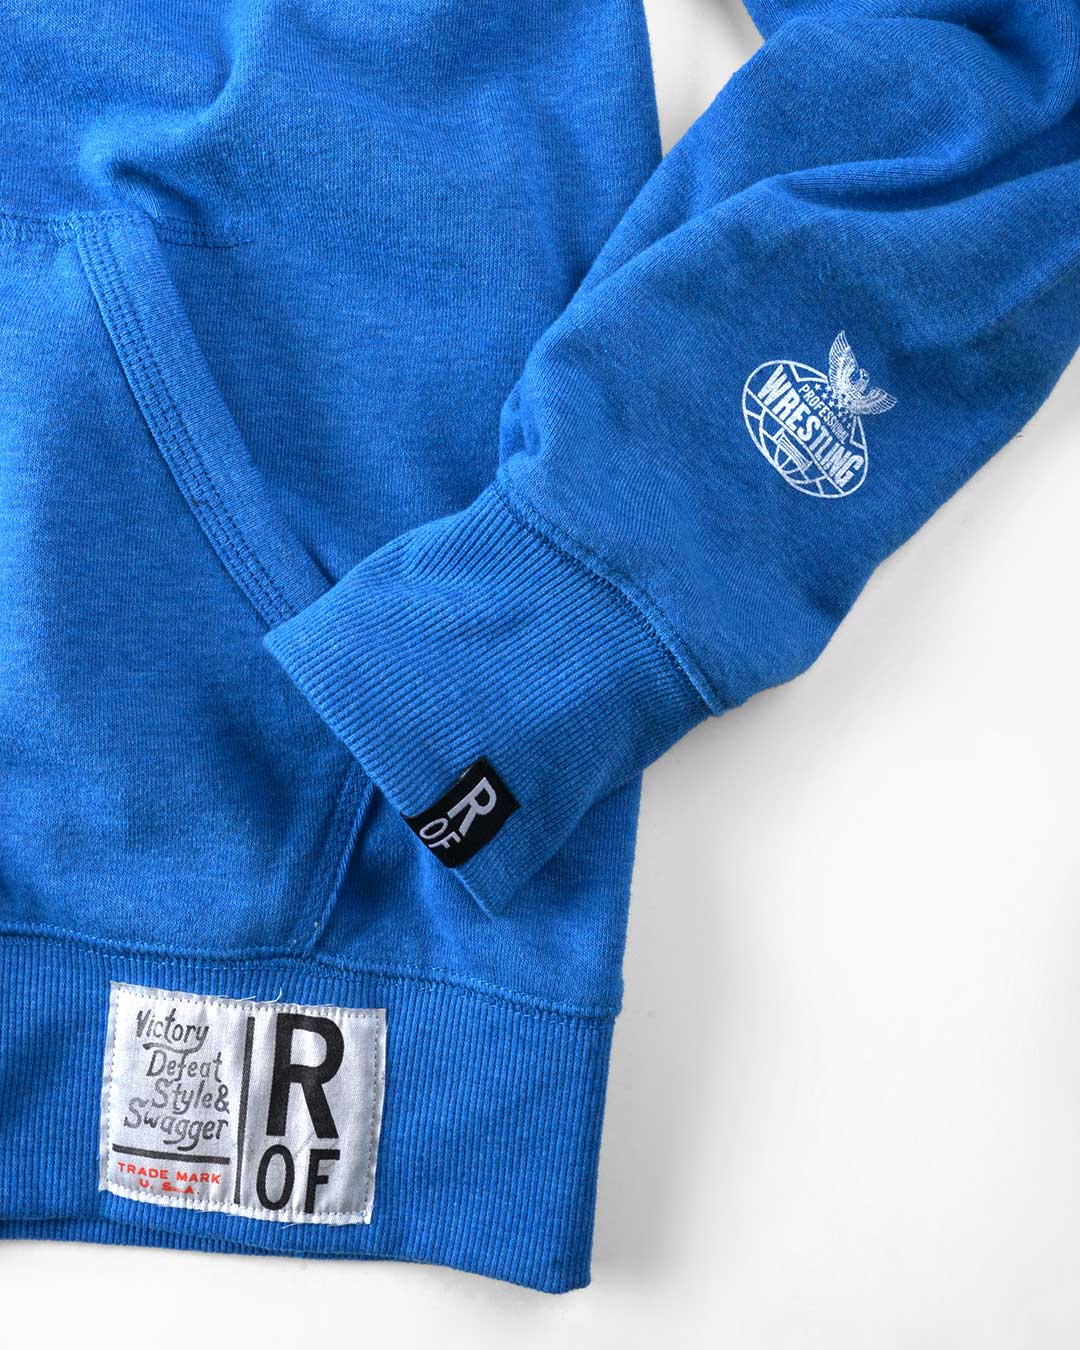 Ric Flair &#39;You&#39;re Talking To The&quot; Blue PO Hoody - Roots of Fight